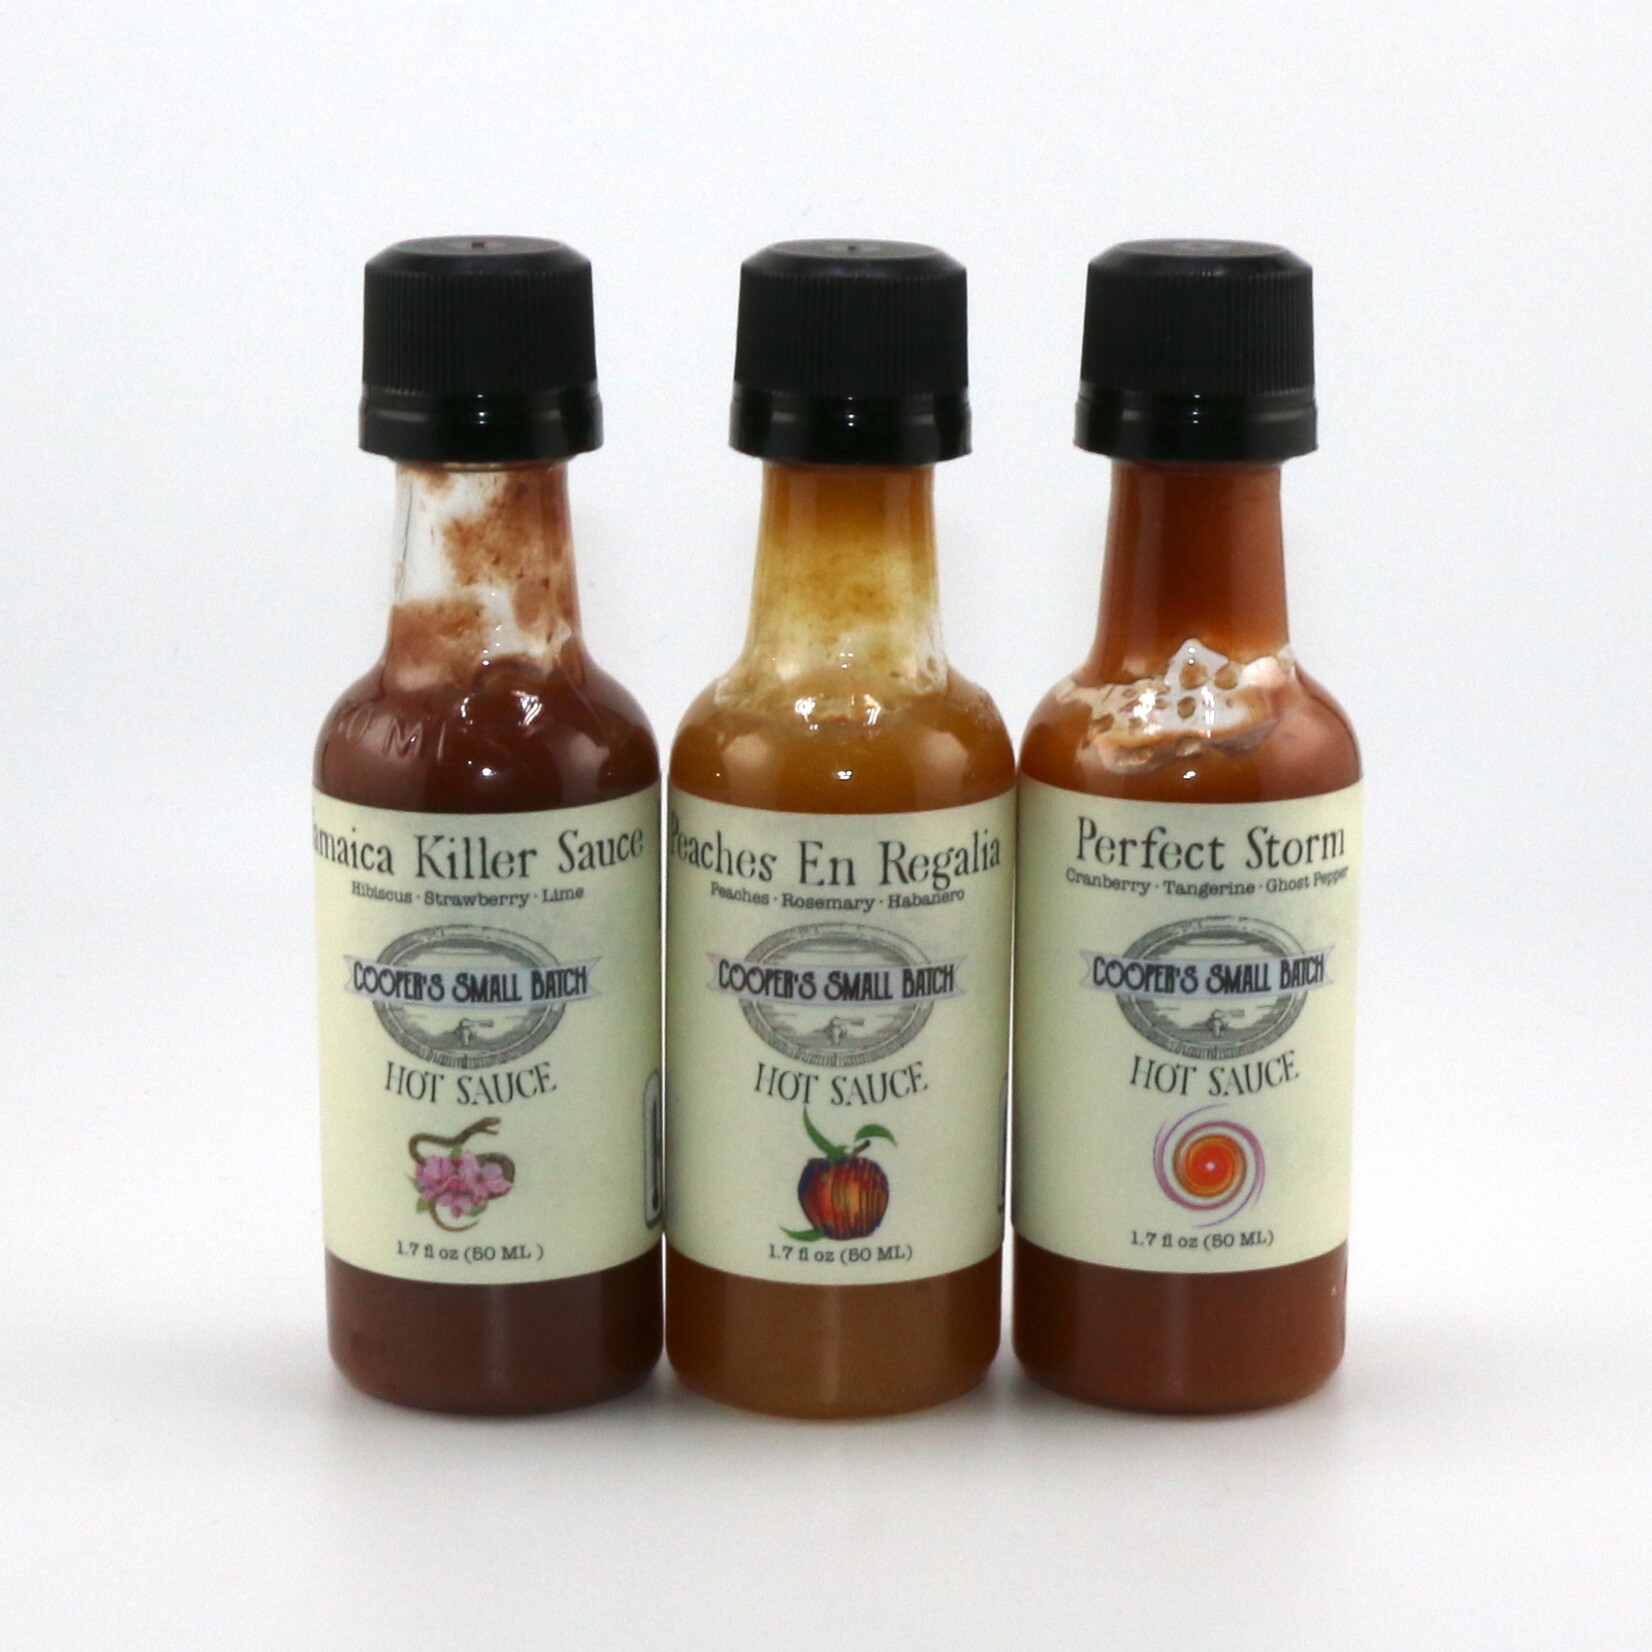 Coopers Small Batch Cooper's Small Batch Fiery Fruit Trio Variety Pack by